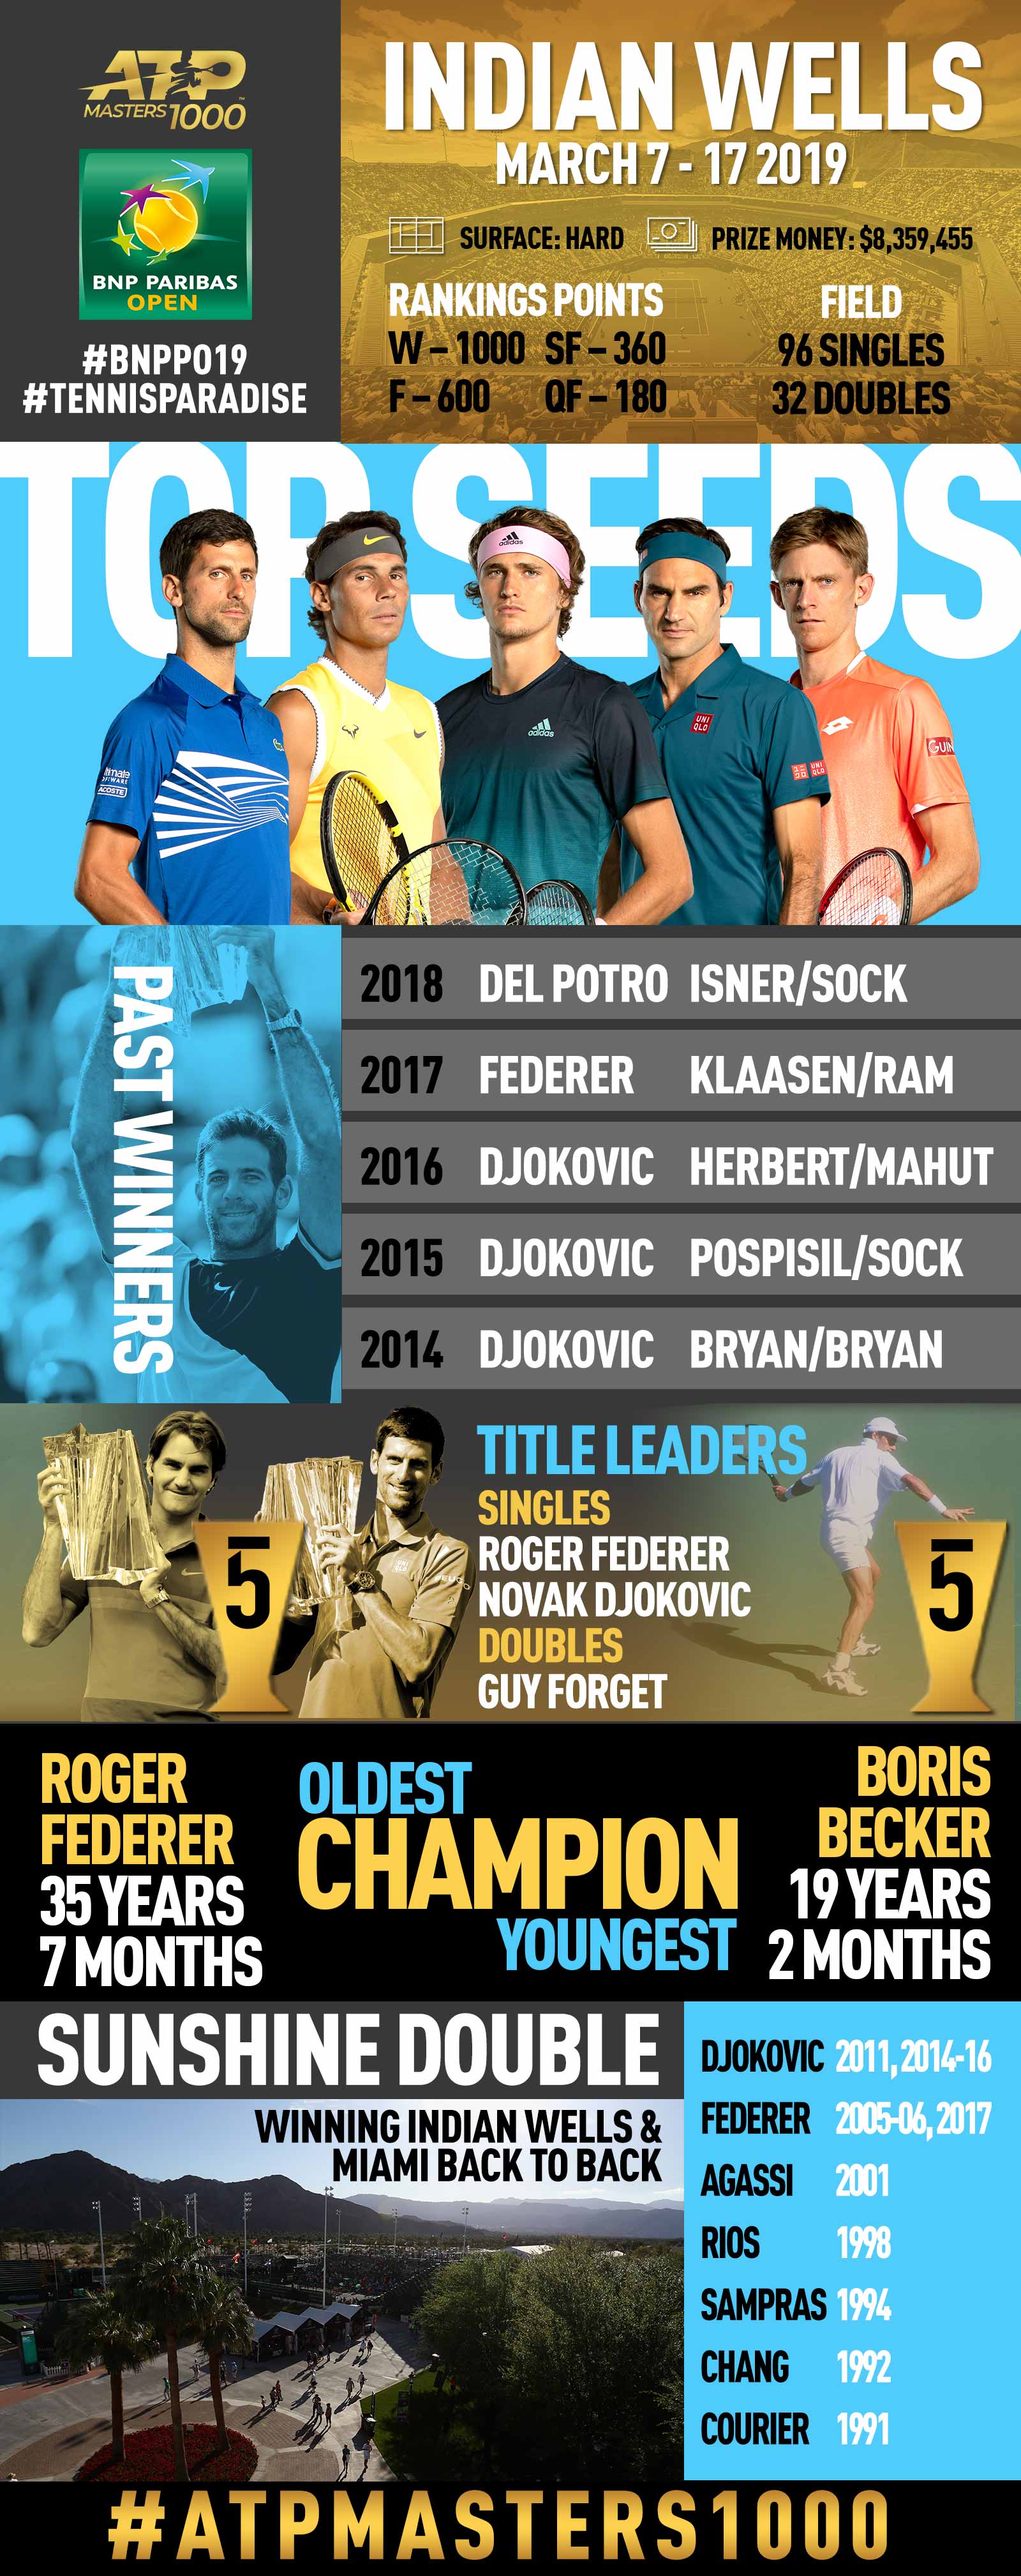 Past champions Djokovic, Federer and Nadal feature at the 2019 <a href='https://www.atptour.com/en/tournaments/indian-wells/404/overview'>BNP Paribas Open</a>, an ATP Masters 1000 tennis tournament in Indian Wells